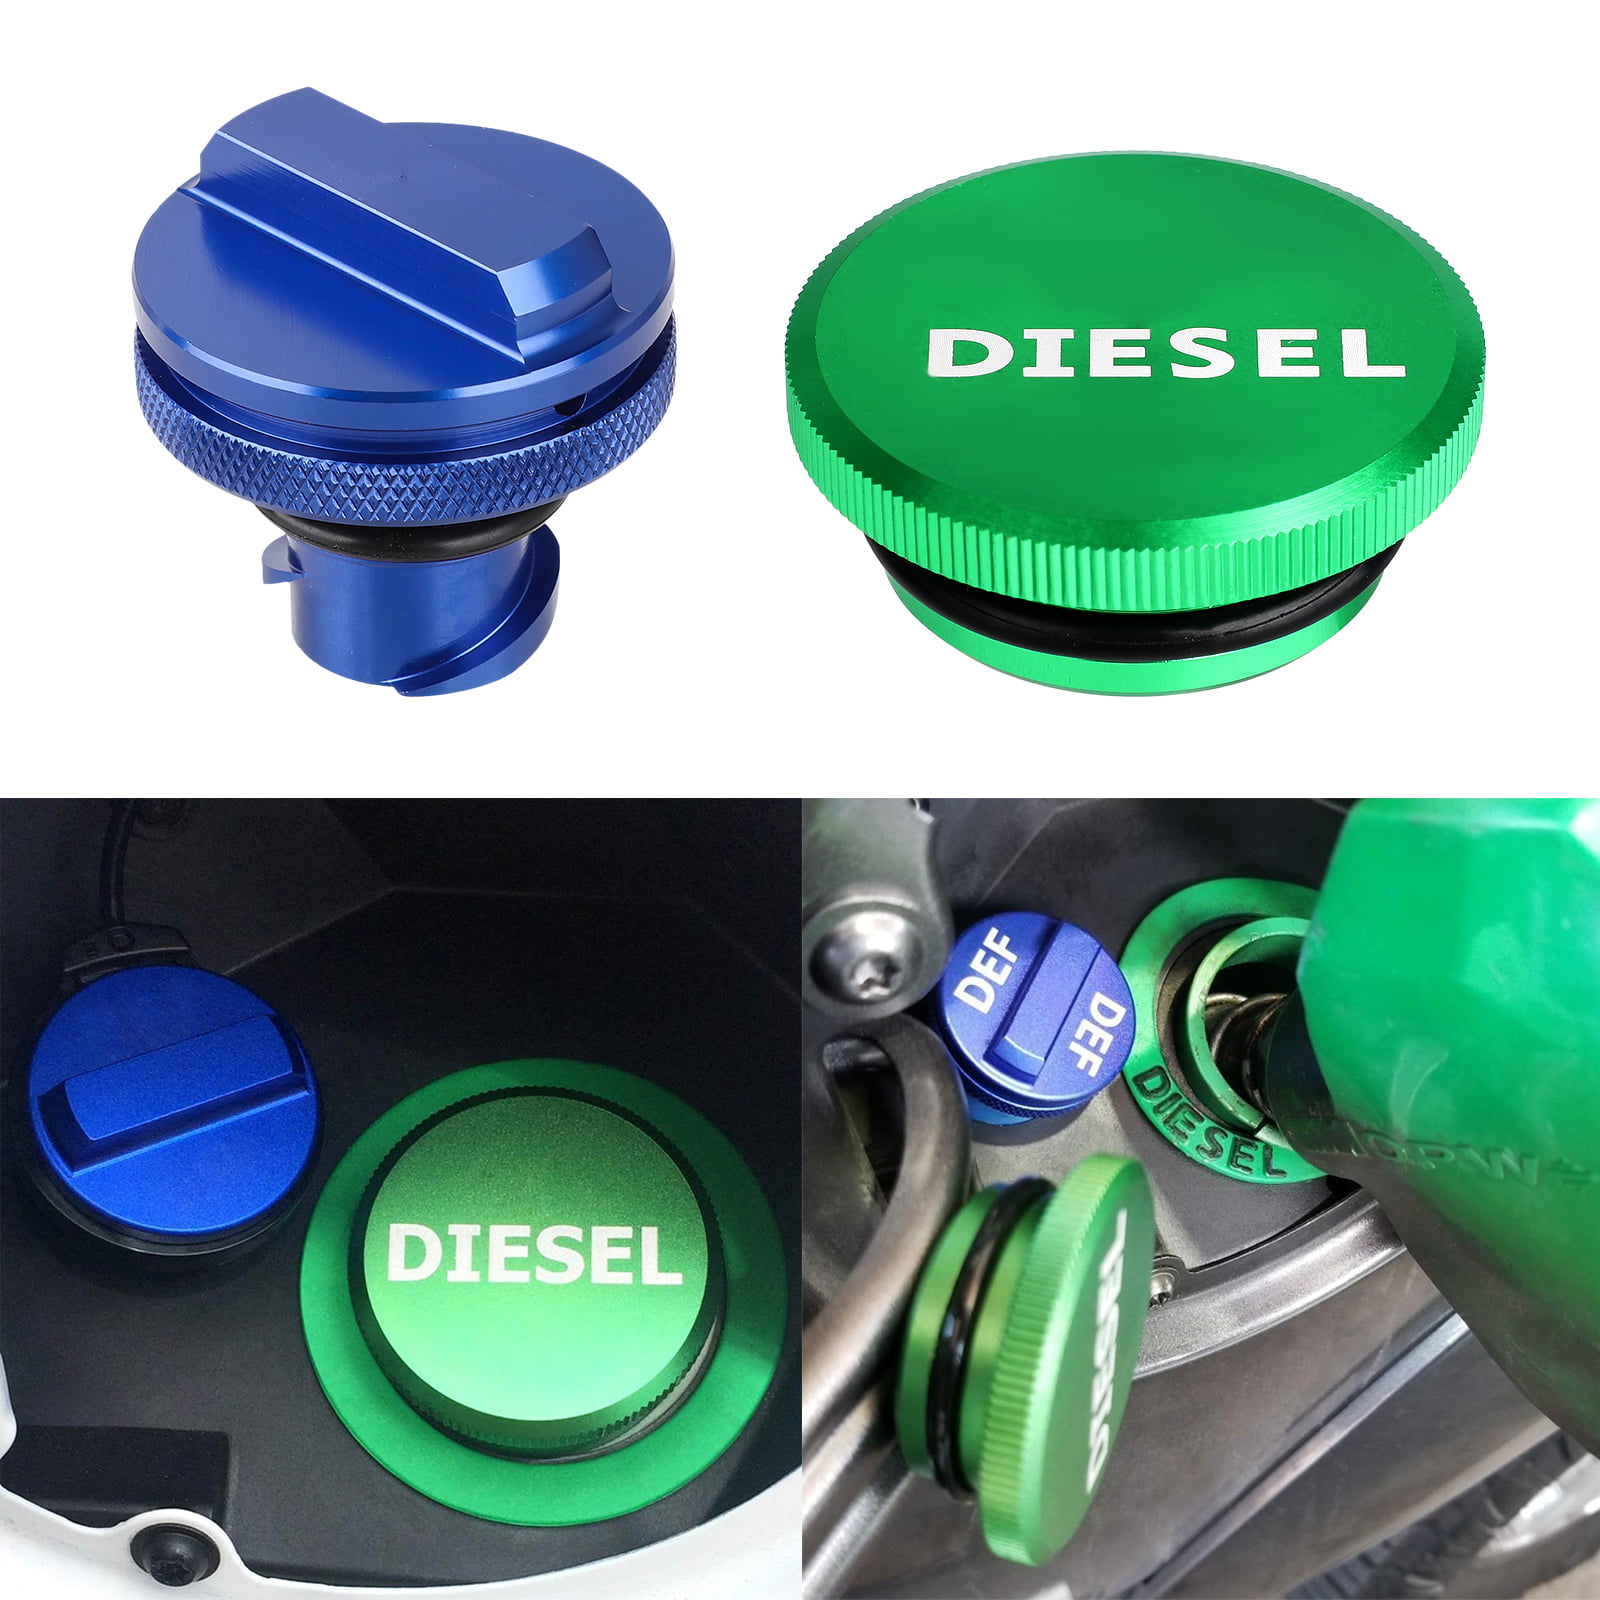 Details about   Green Alloy Diesel Fuel Tank Cap Cover for 2013-2018 Dodge Ram 2500 3500 Cummins